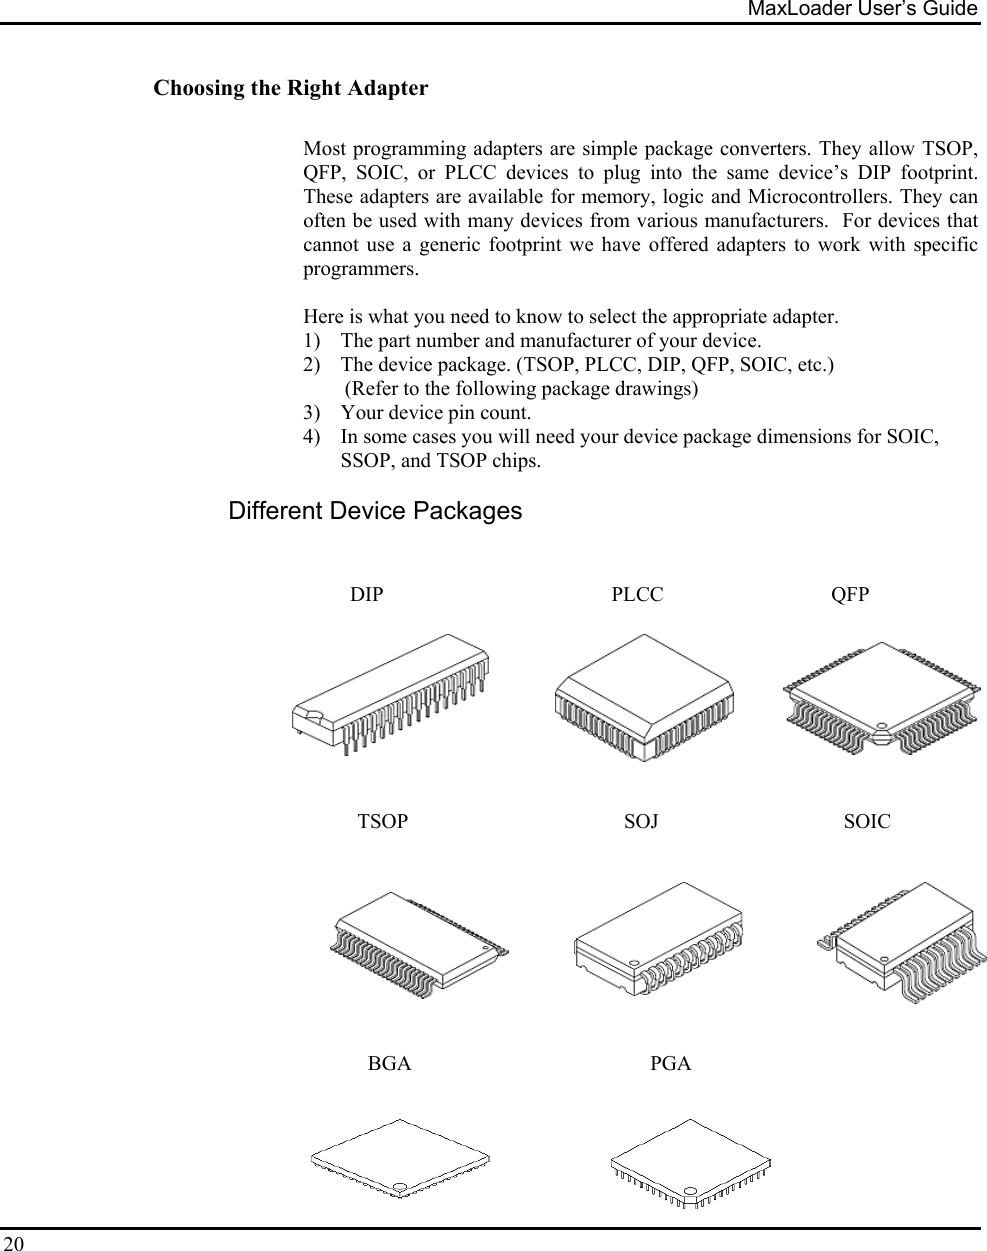 MaxLoader User’s Guide  20 Choosing the Right Adapter  Most programming adapters are simple package converters. They allow TSOP, QFP, SOIC, or PLCC devices to plug into the same device’s DIP footprint. These adapters are available for memory, logic and Microcontrollers. They can often be used with many devices from various manufacturers.  For devices that cannot use a generic footprint we have offered adapters to work with specific programmers.    Here is what you need to know to select the appropriate adapter. 1)  The part number and manufacturer of your device. 2)  The device package. (TSOP, PLCC, DIP, QFP, SOIC, etc.)            (Refer to the following package drawings) 3)  Your device pin count. 4)  In some cases you will need your device package dimensions for SOIC, SSOP, and TSOP chips.  Different Device Packages             DIP                    PLCC                   QFP                                                                                TSOP          SOJ              SOIC         BGA               PGA  